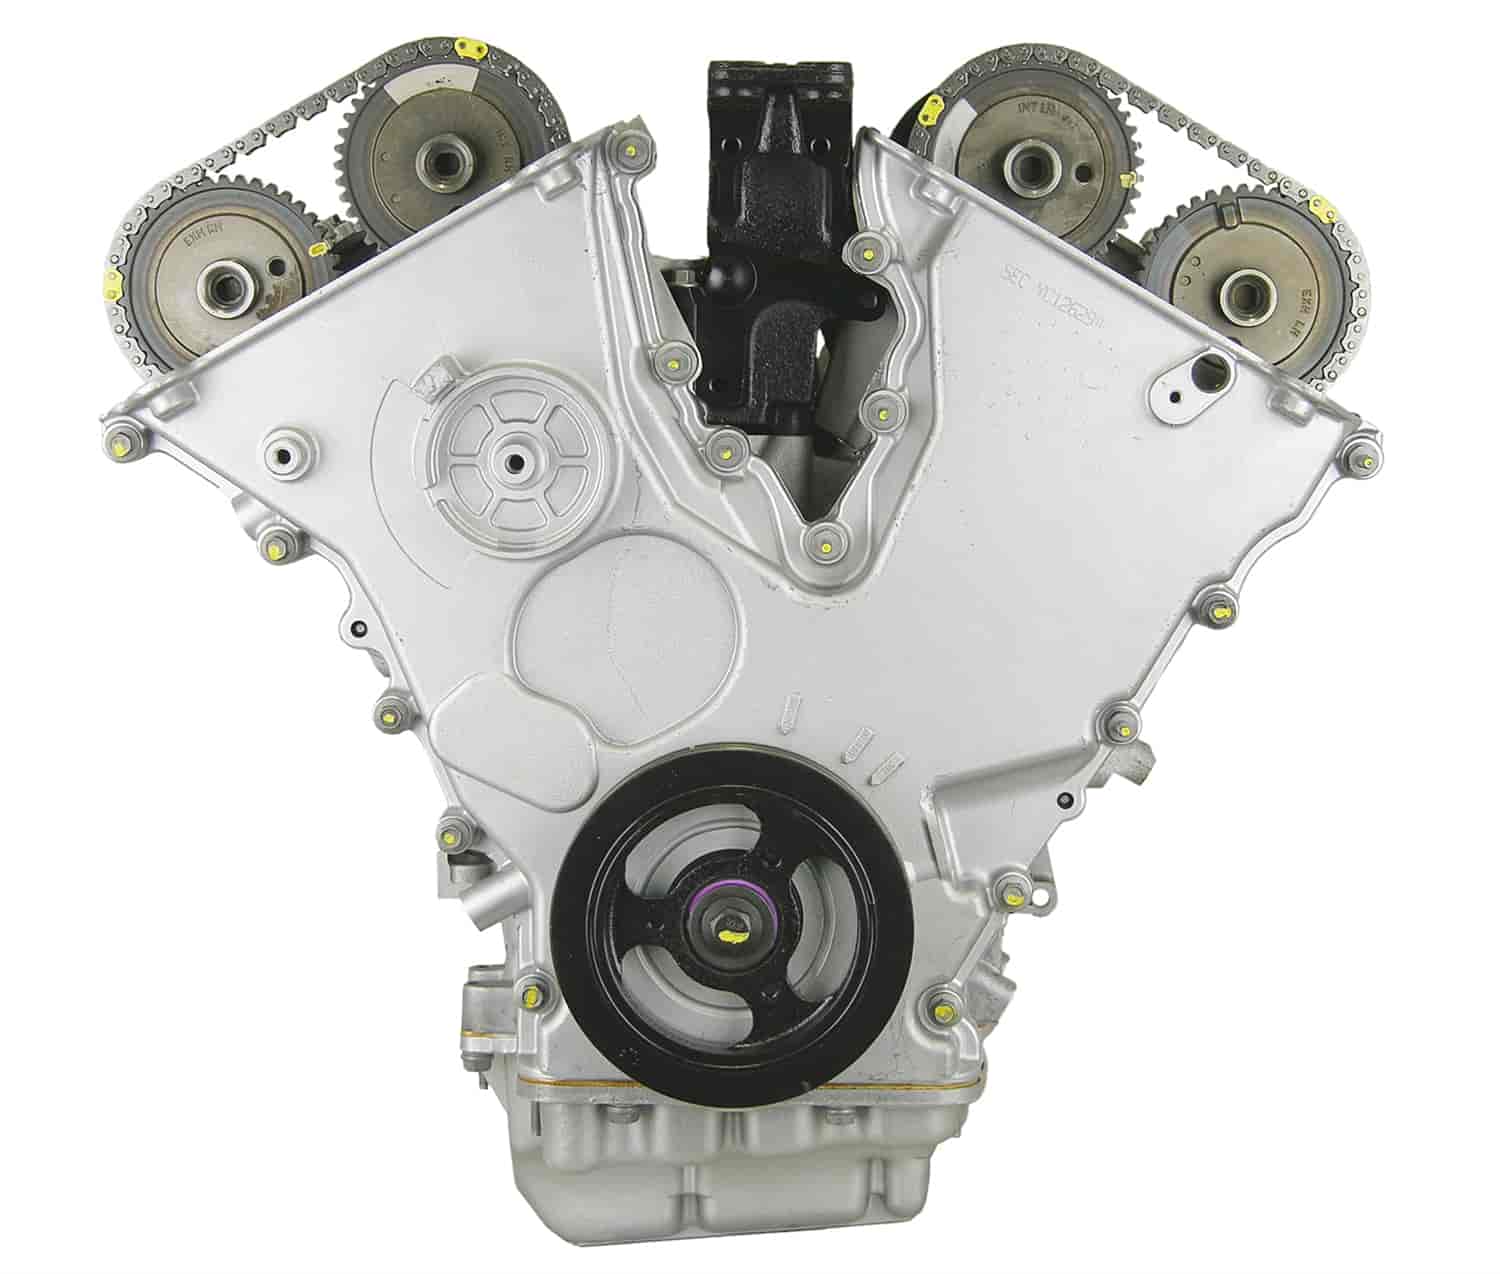 Remanufactured Crate Engine for 1999-2000 Ford Contour &